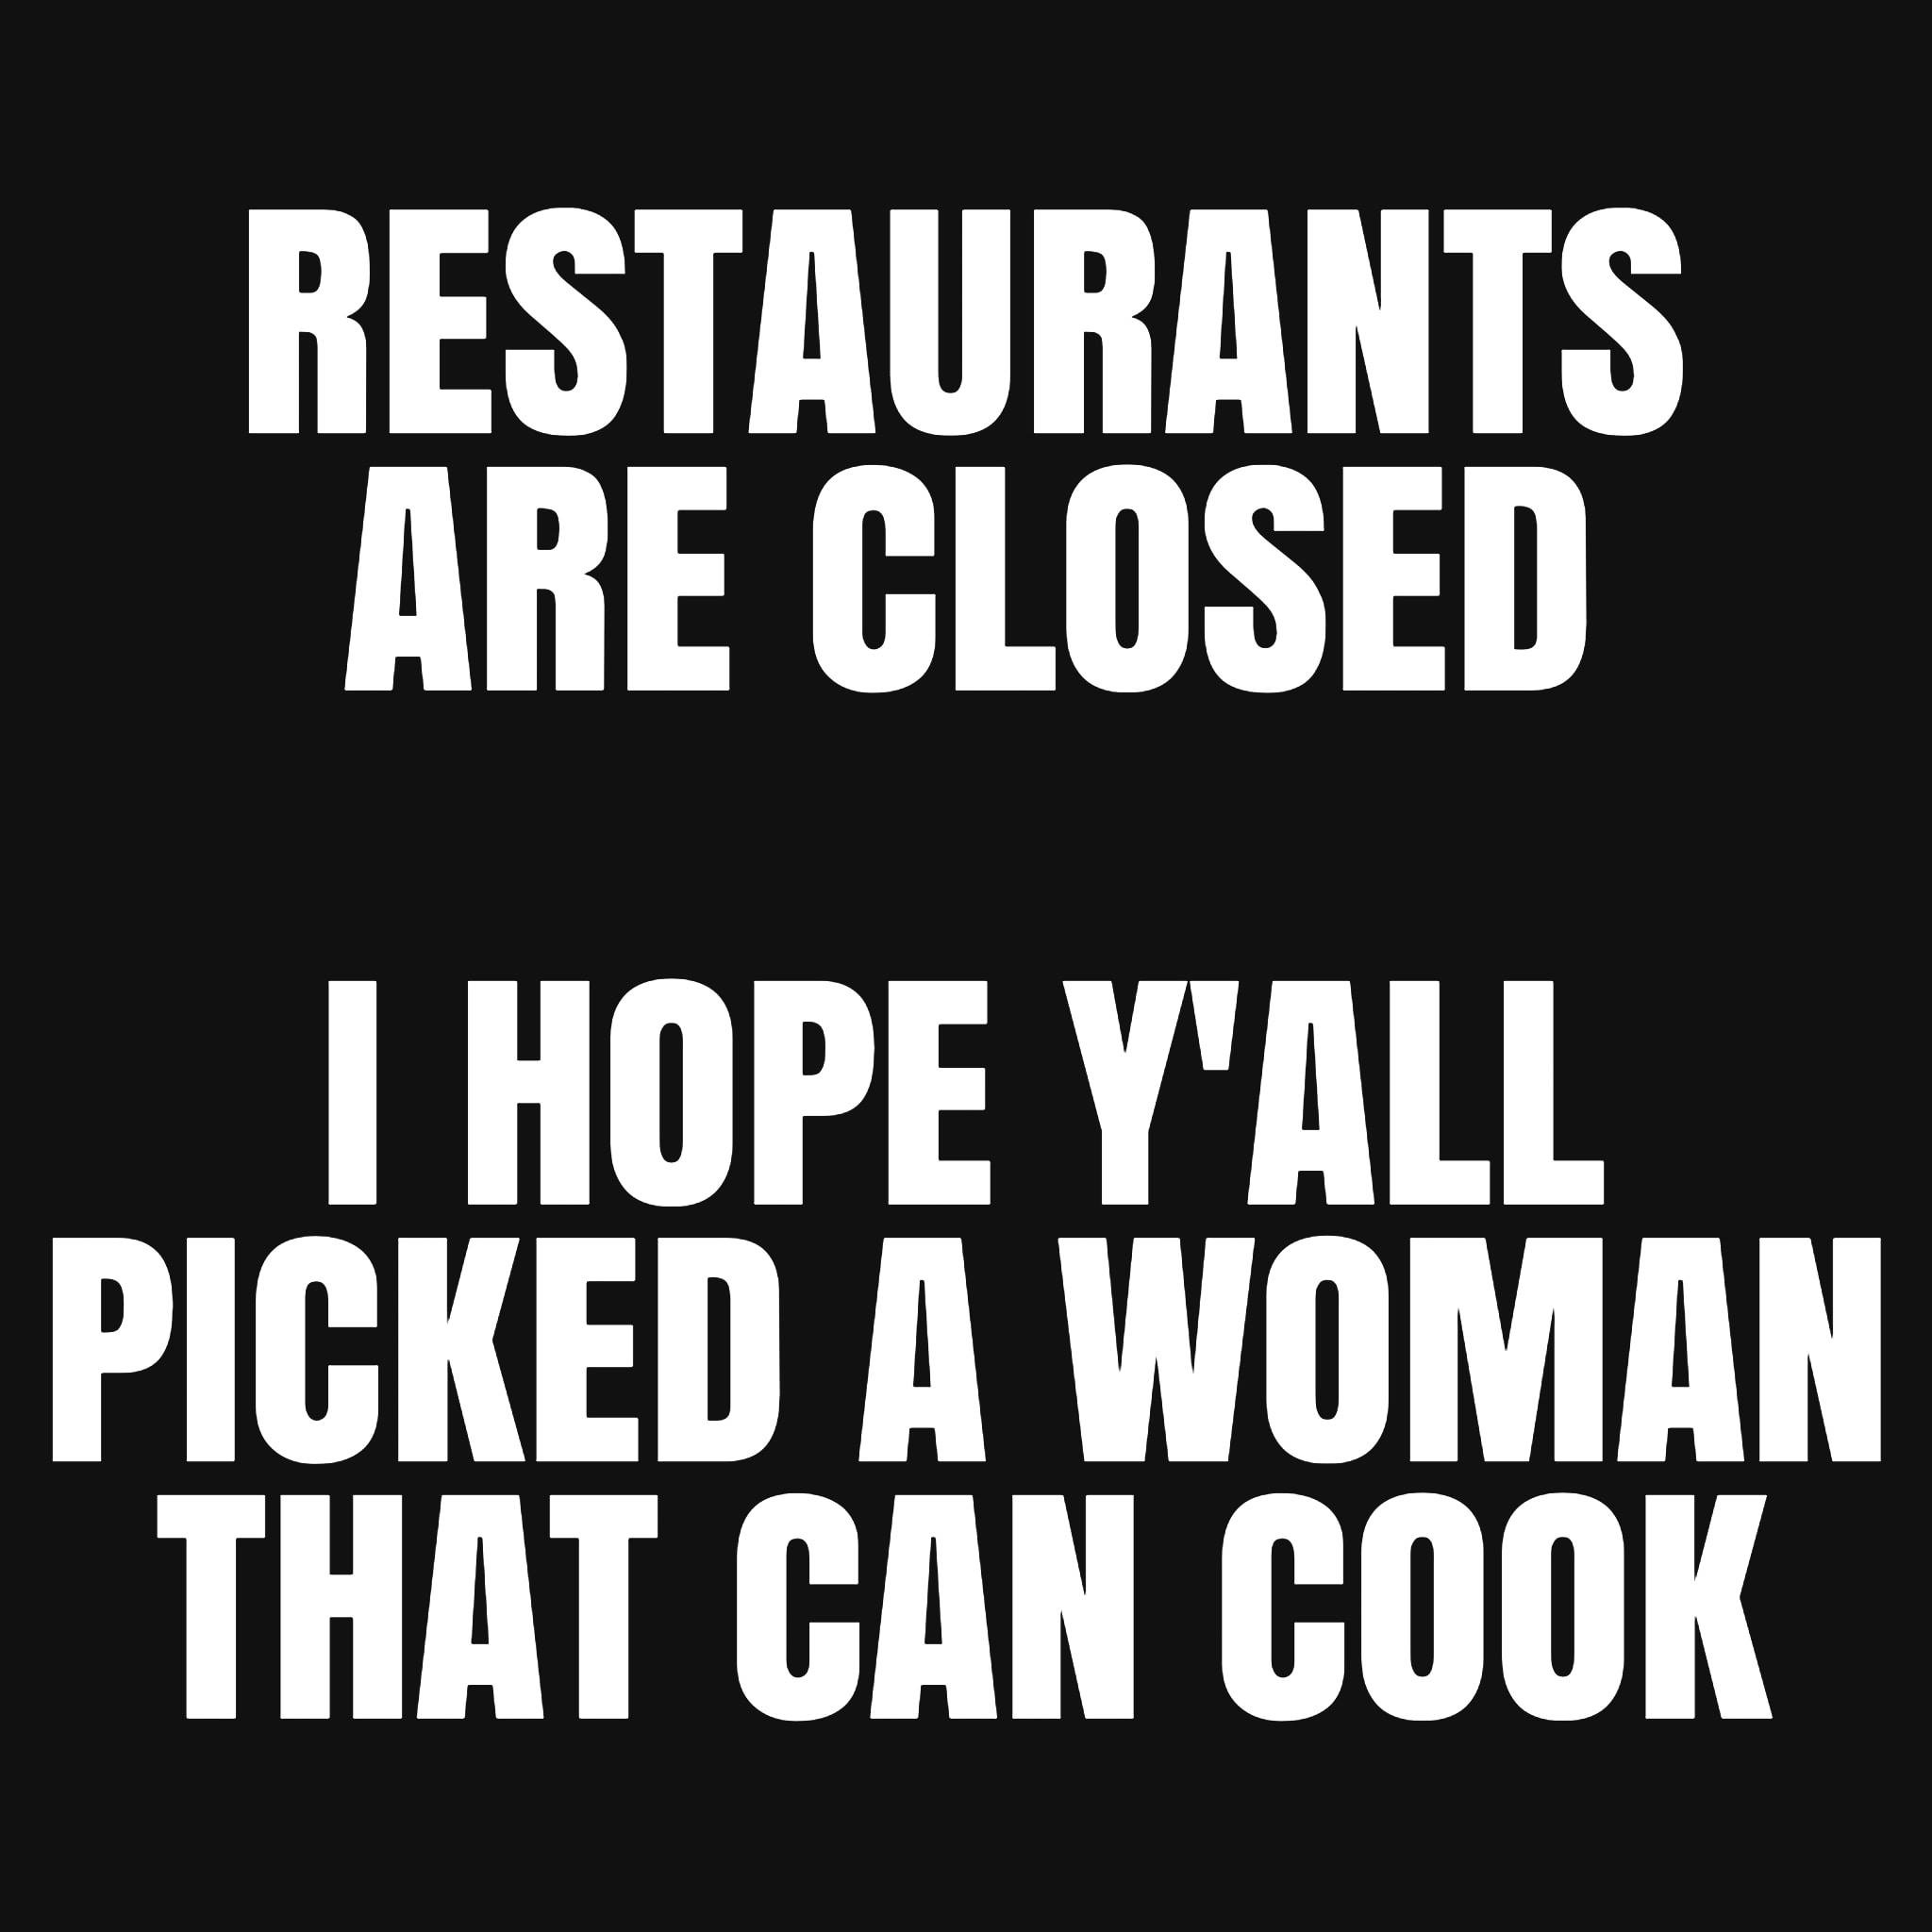 monochrome - Restaurants Are Closed I Hope Y'All Picked A Woman That Can Cook